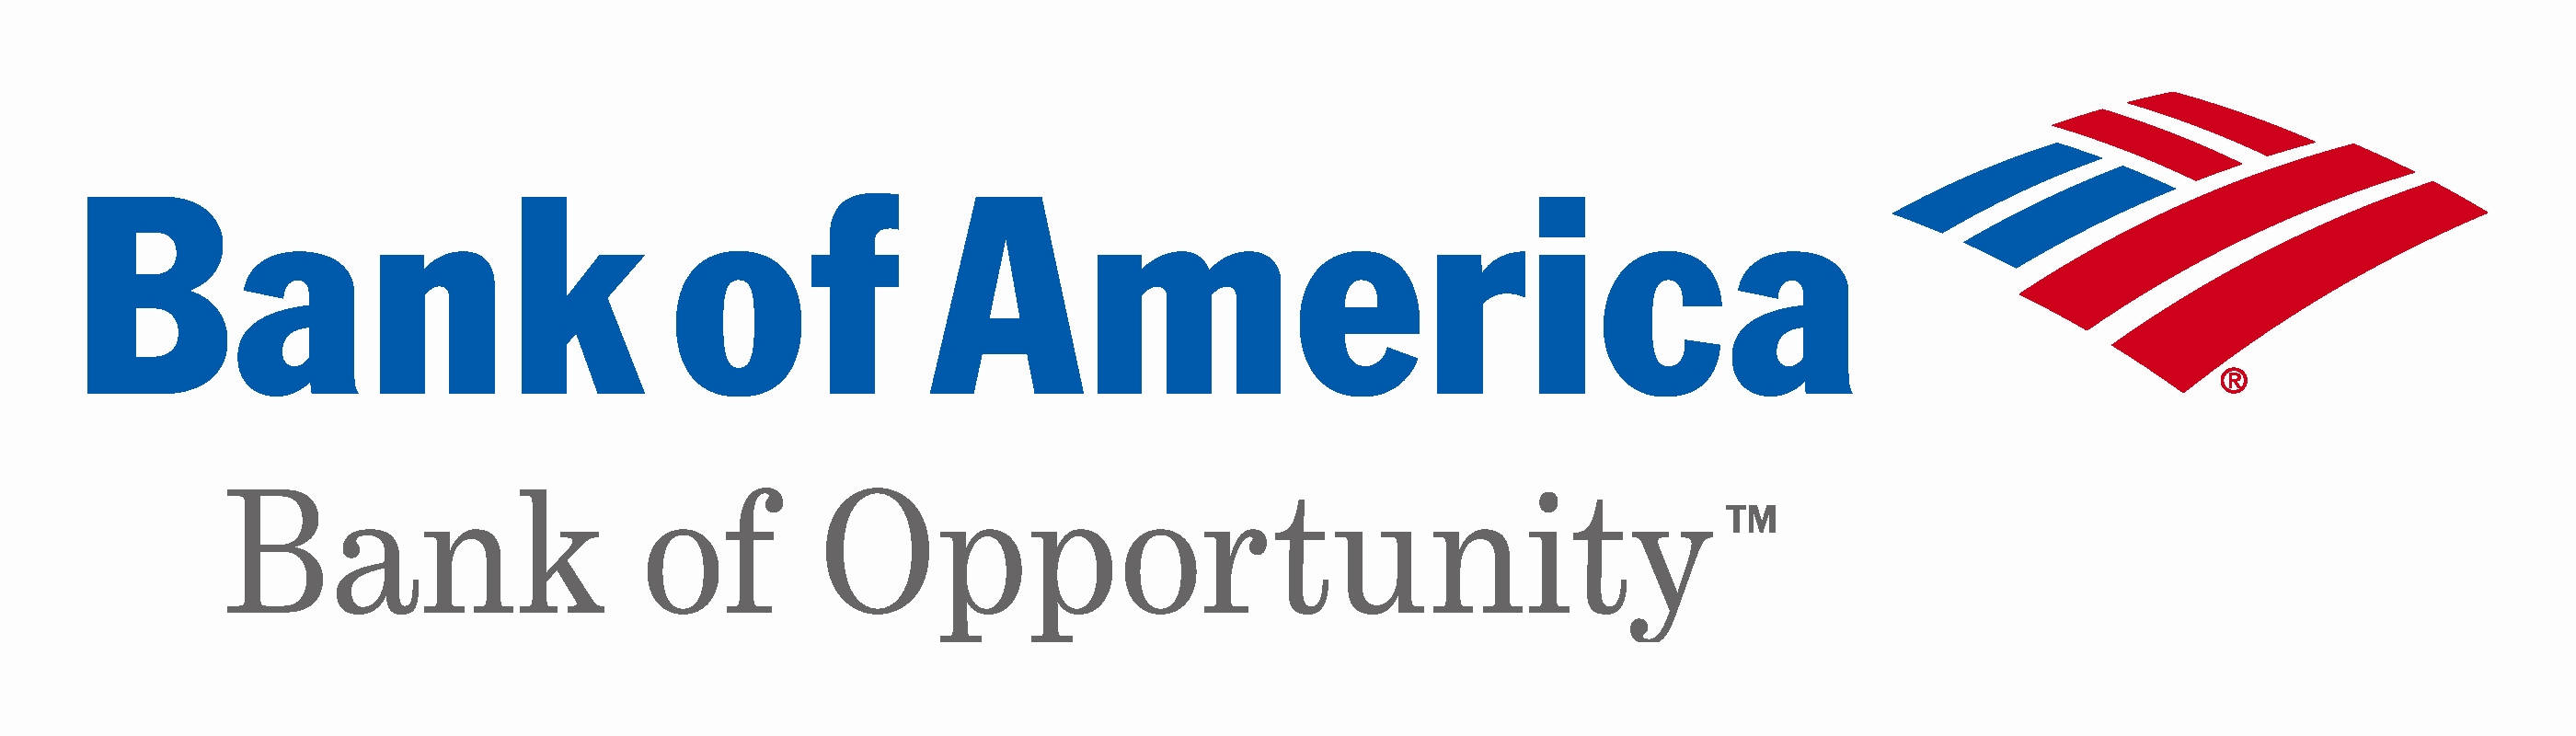 Bank Of America Bank Of Opportunity Background